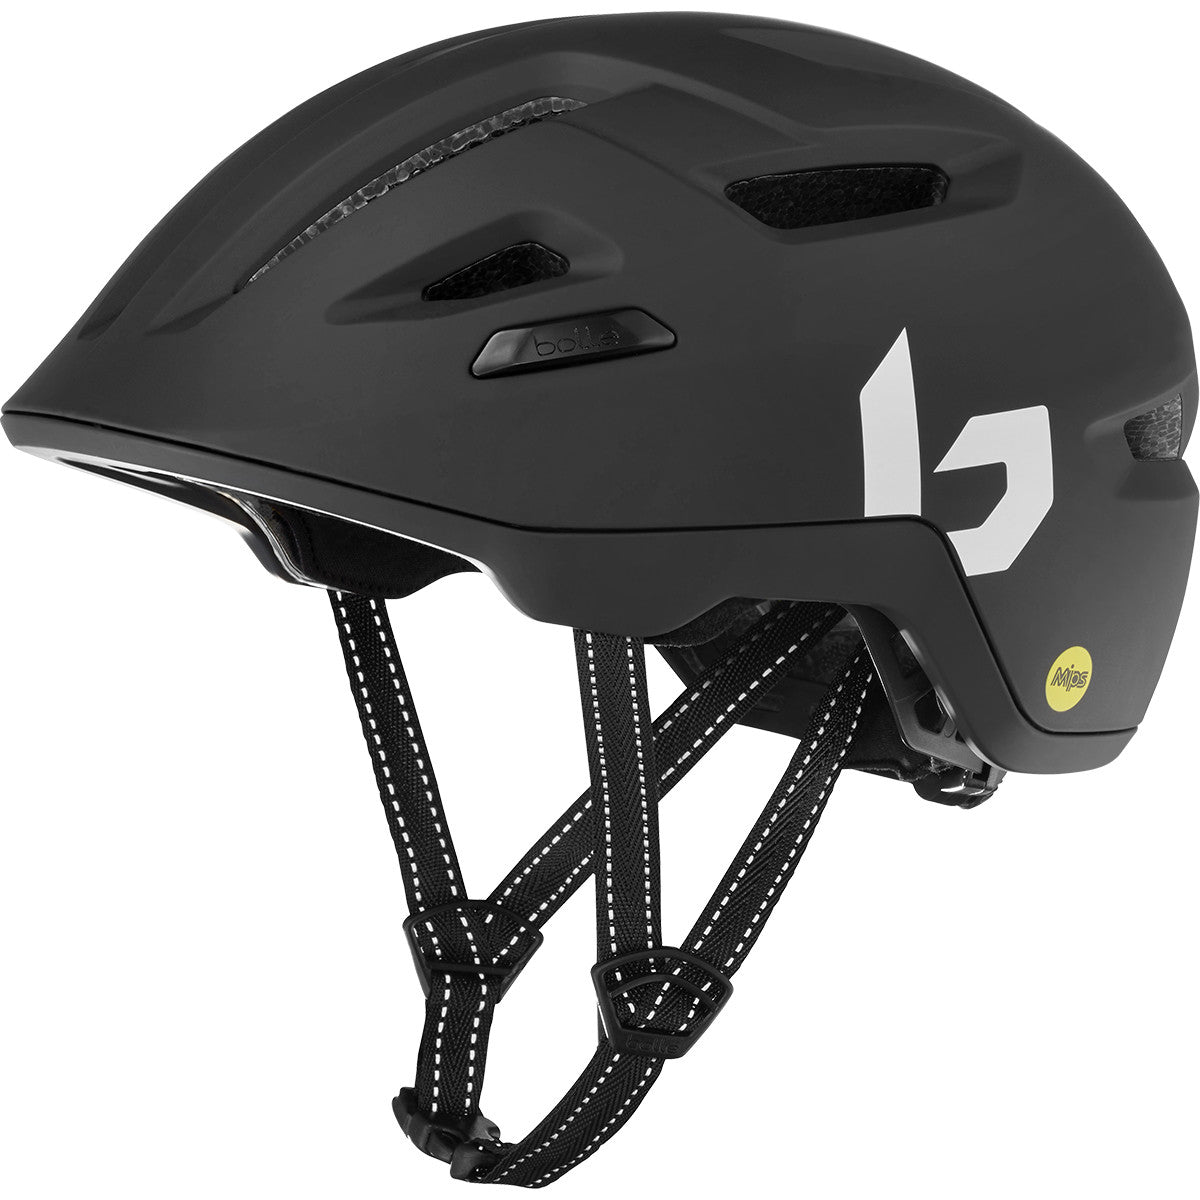 Bolle Stance Mips Cycling Helmet